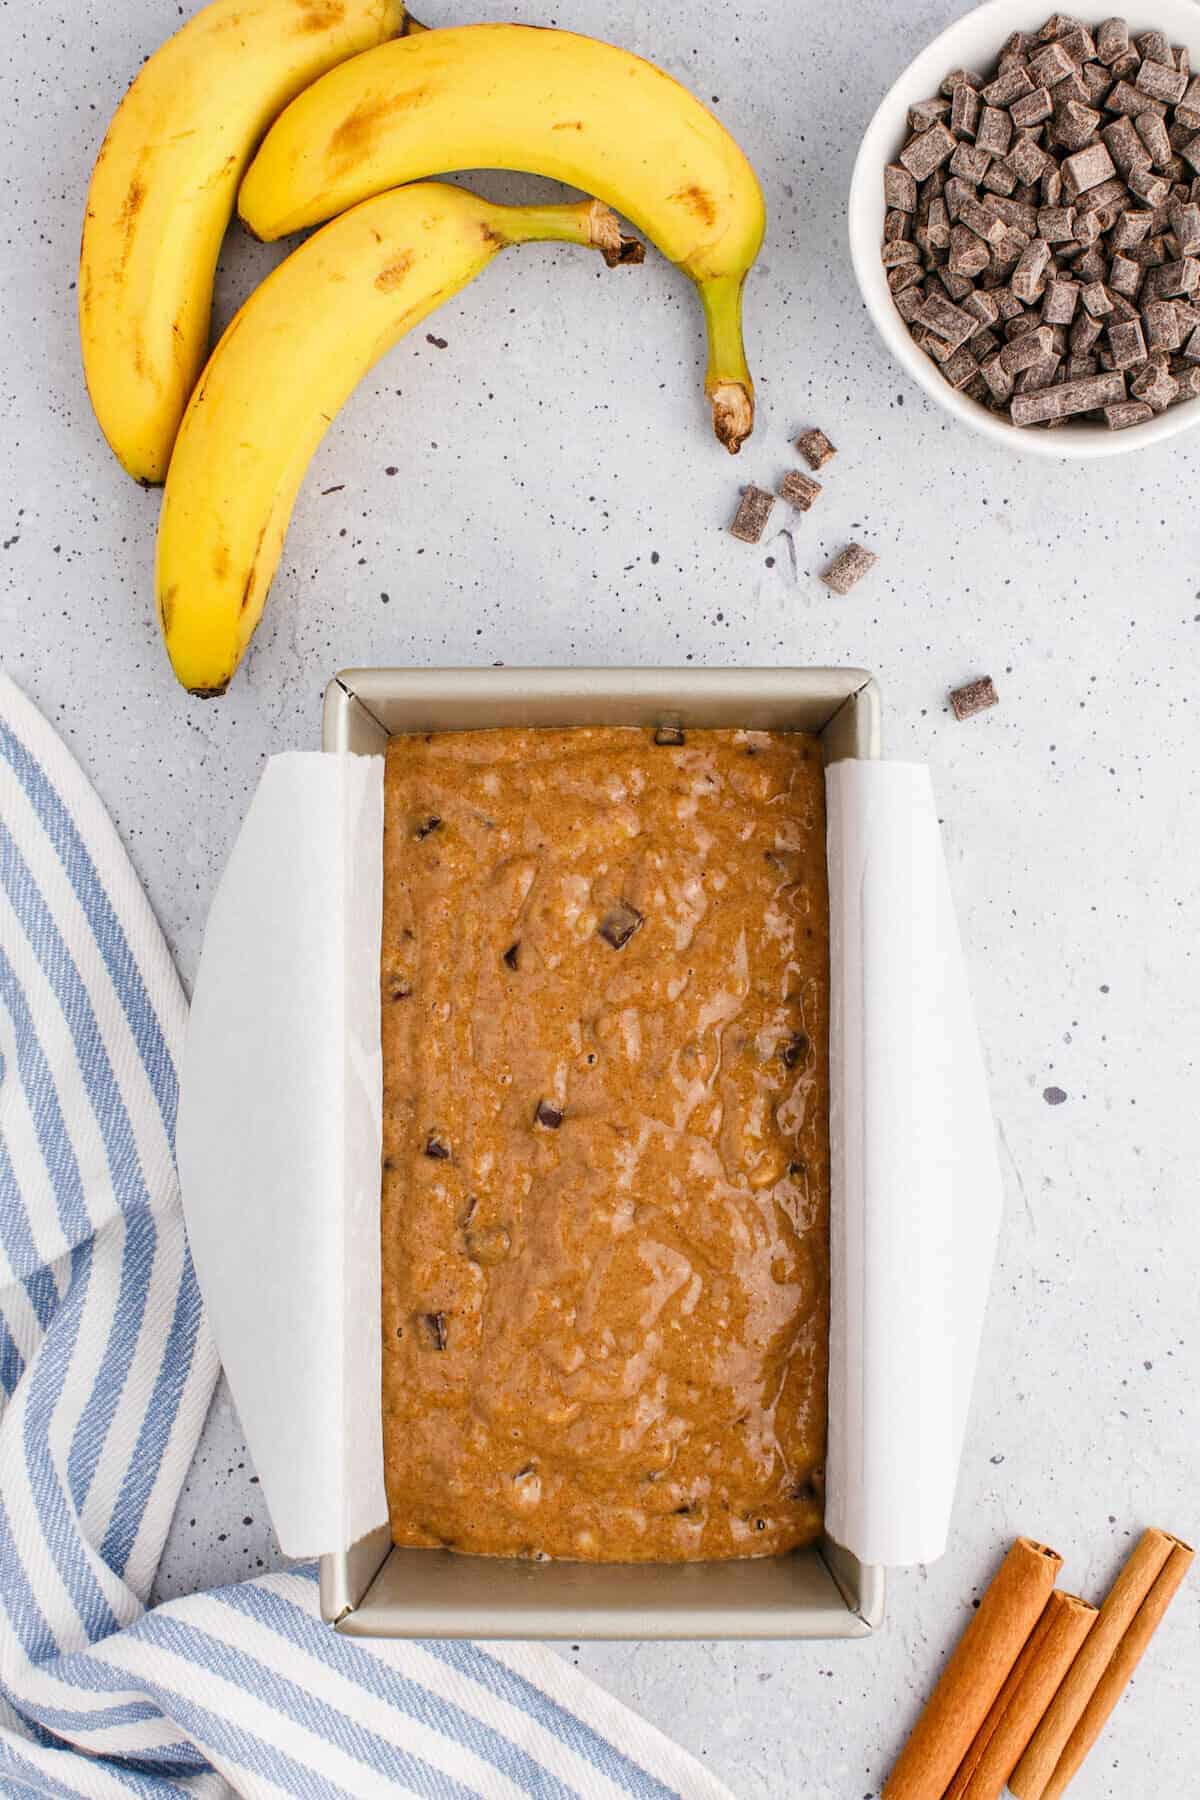 adding the banana bread batter into the loaf pan.